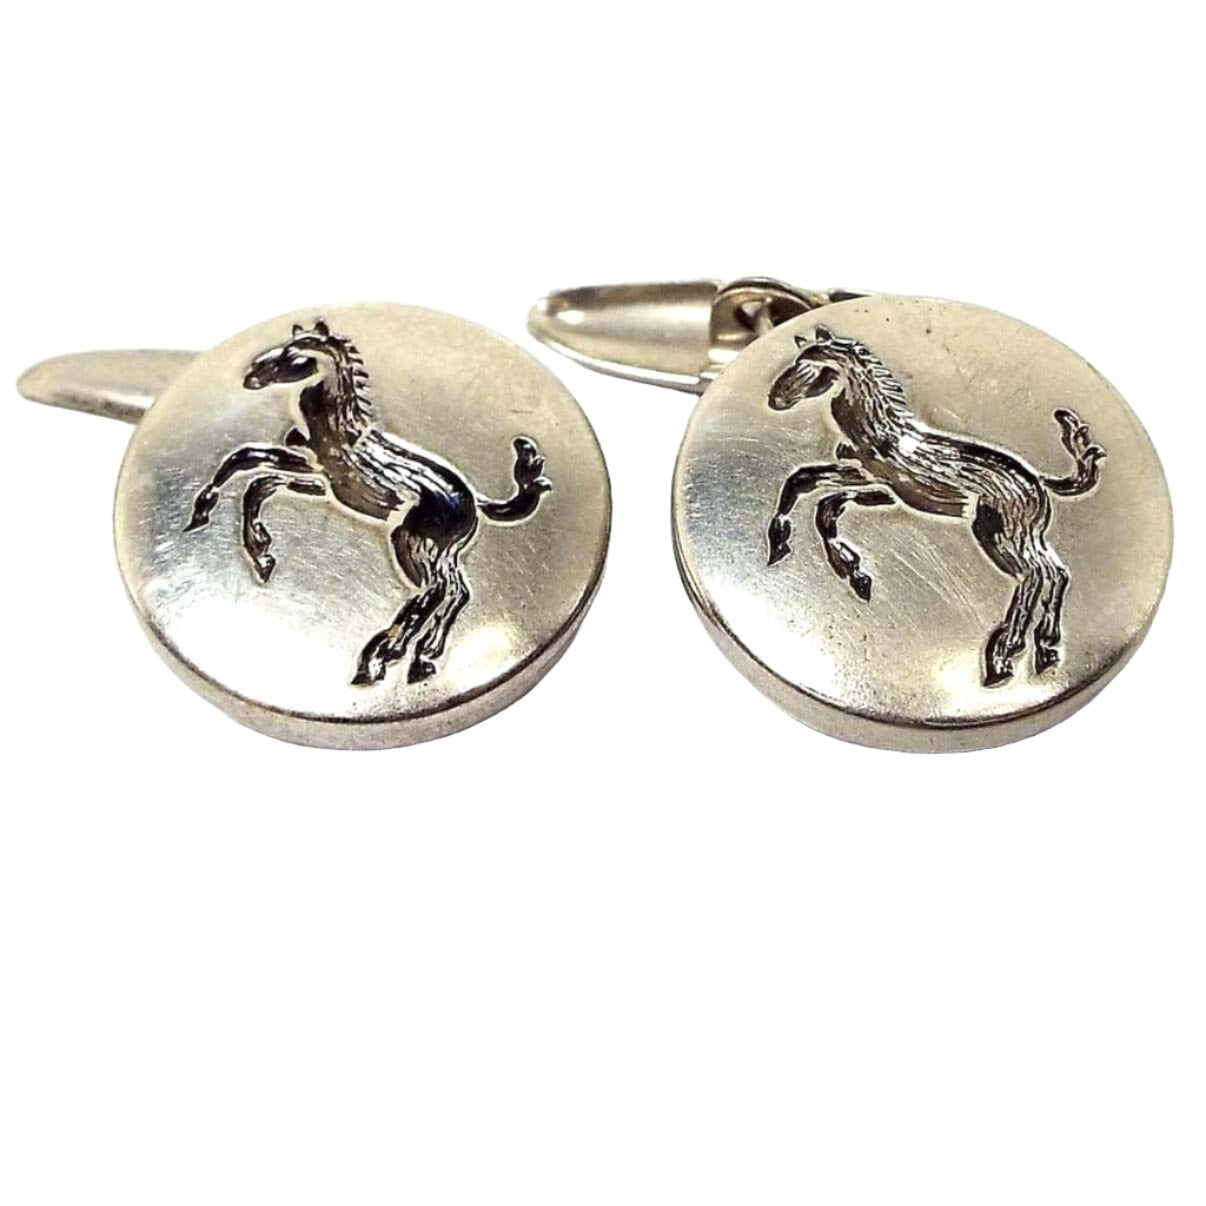 Front view of the Mid Century vintage button style cufflinks. They are round and silver tone in color. There is a side view of a pony or horse stamped in the middle that's painted gray on the inside. Part of the oval link backs are showing on the end of the links.